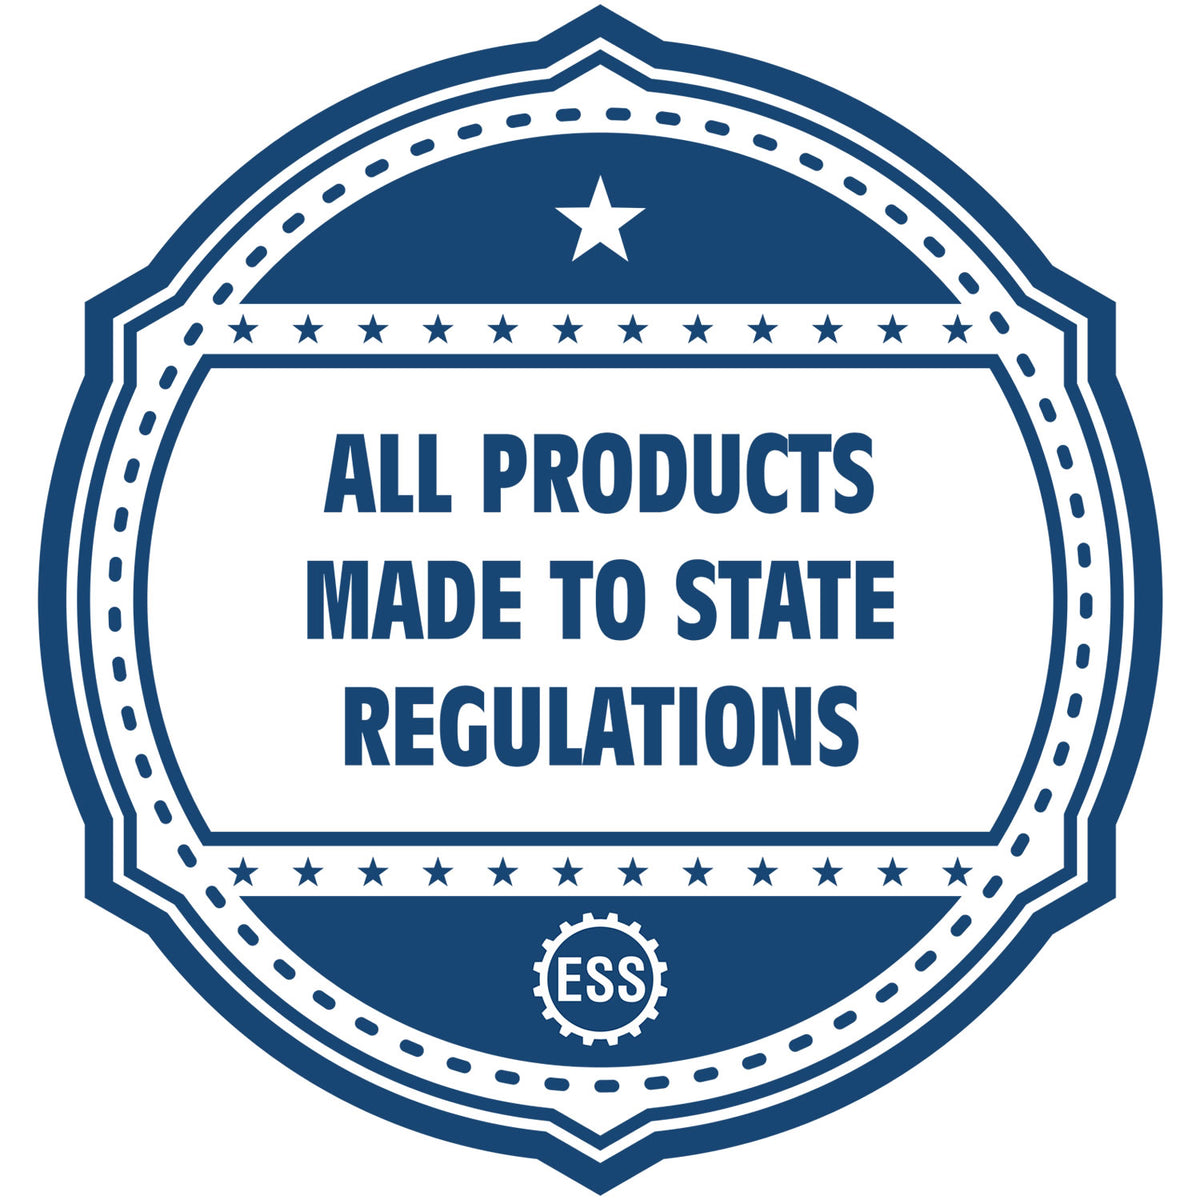 An icon or badge element for the State of Virginia Extended Long Reach Engineer Seal showing that this product is made in compliance with state regulations.